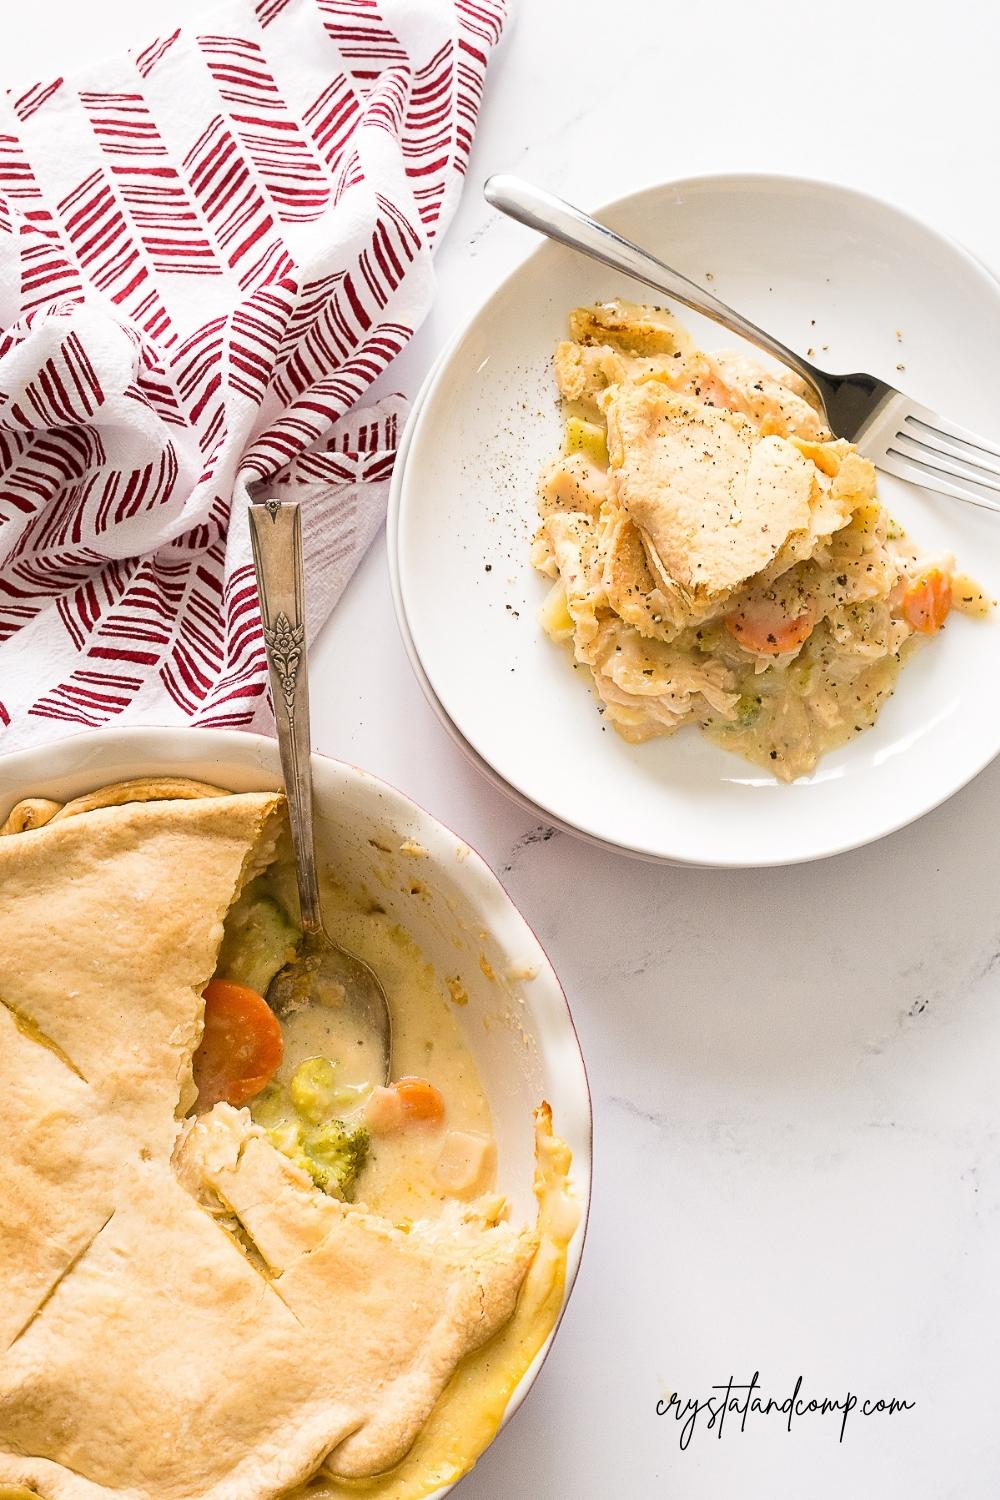 chicken pot pie in dish and plate